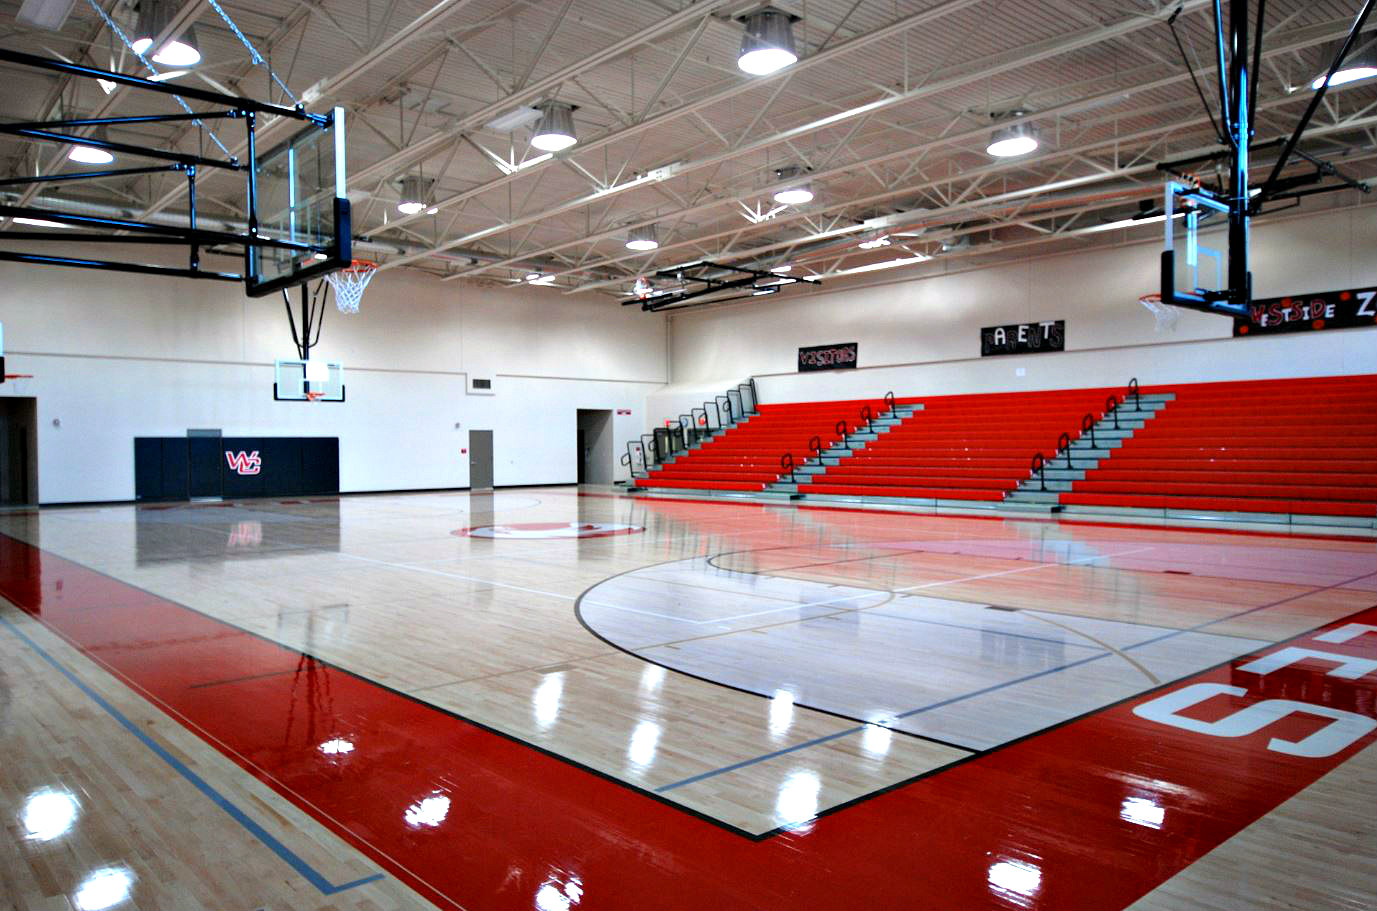 Westside Christian High School, USA with installed daylighting systems